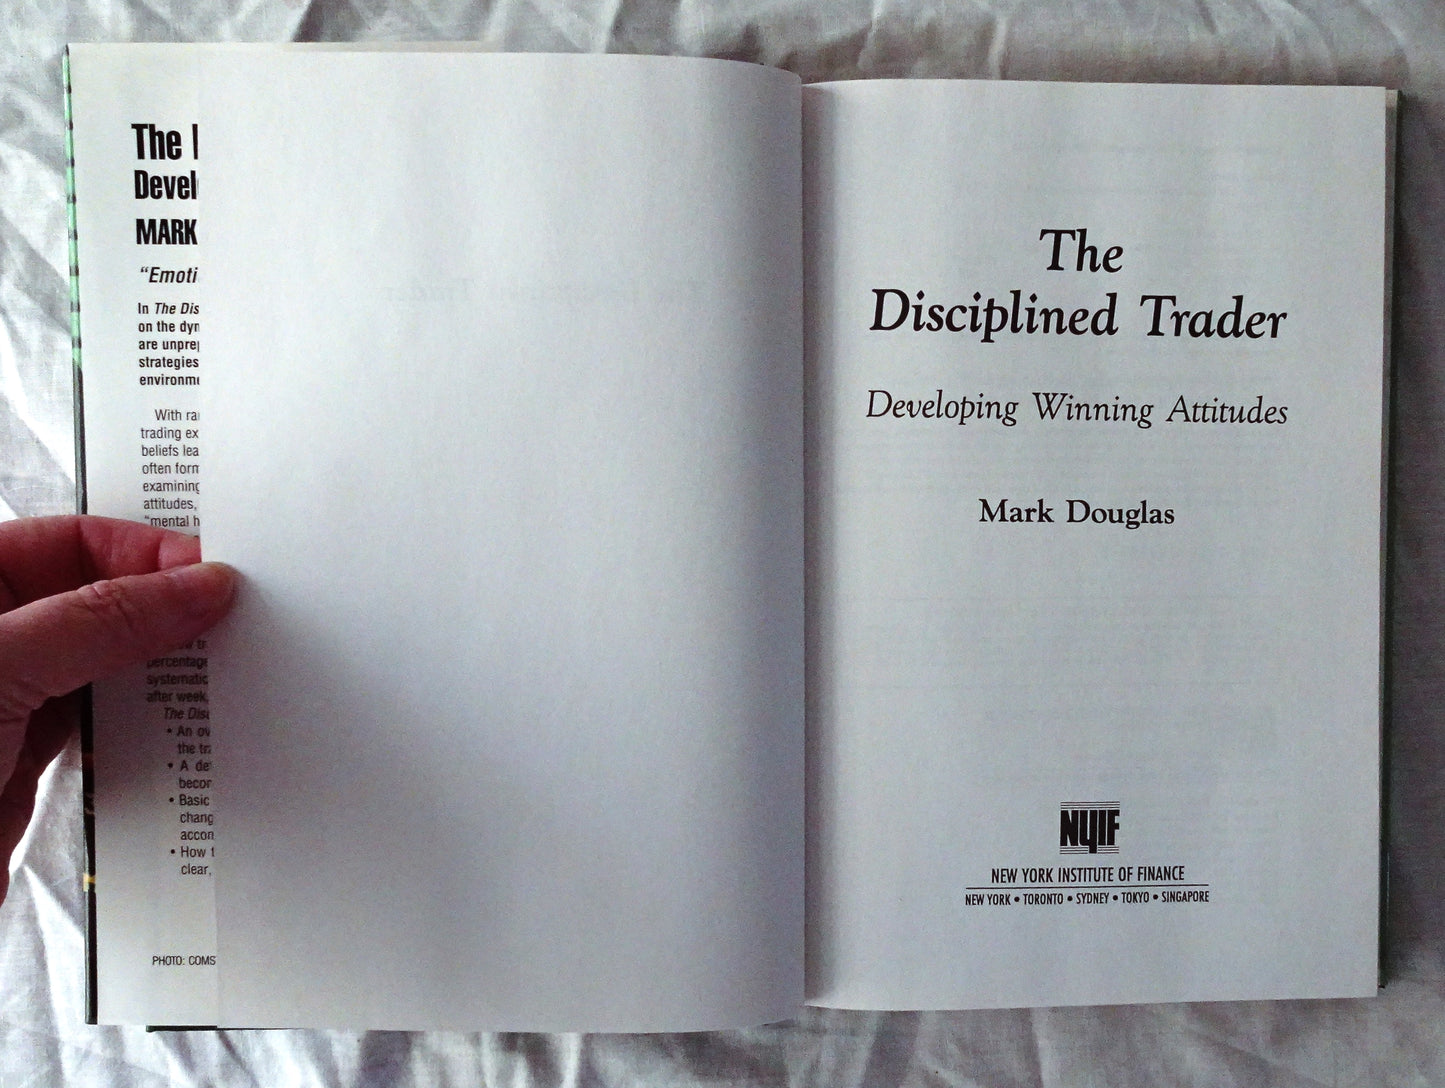 The Disciplined Trader by Mark Douglas